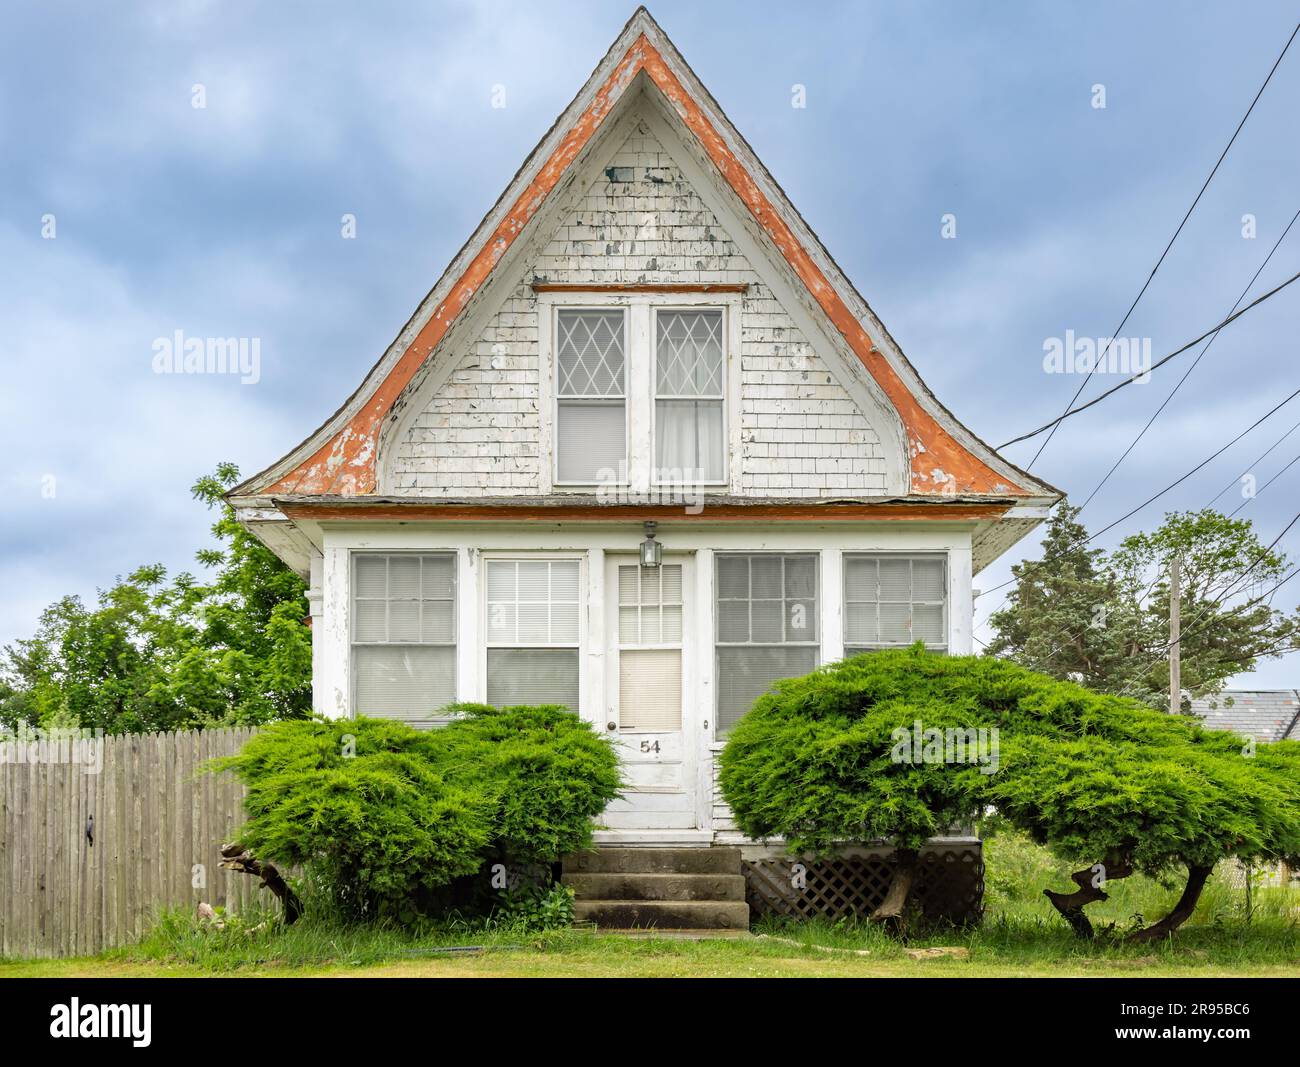 front of an old house at 54 montauk in east moriches, ny Stock Photo